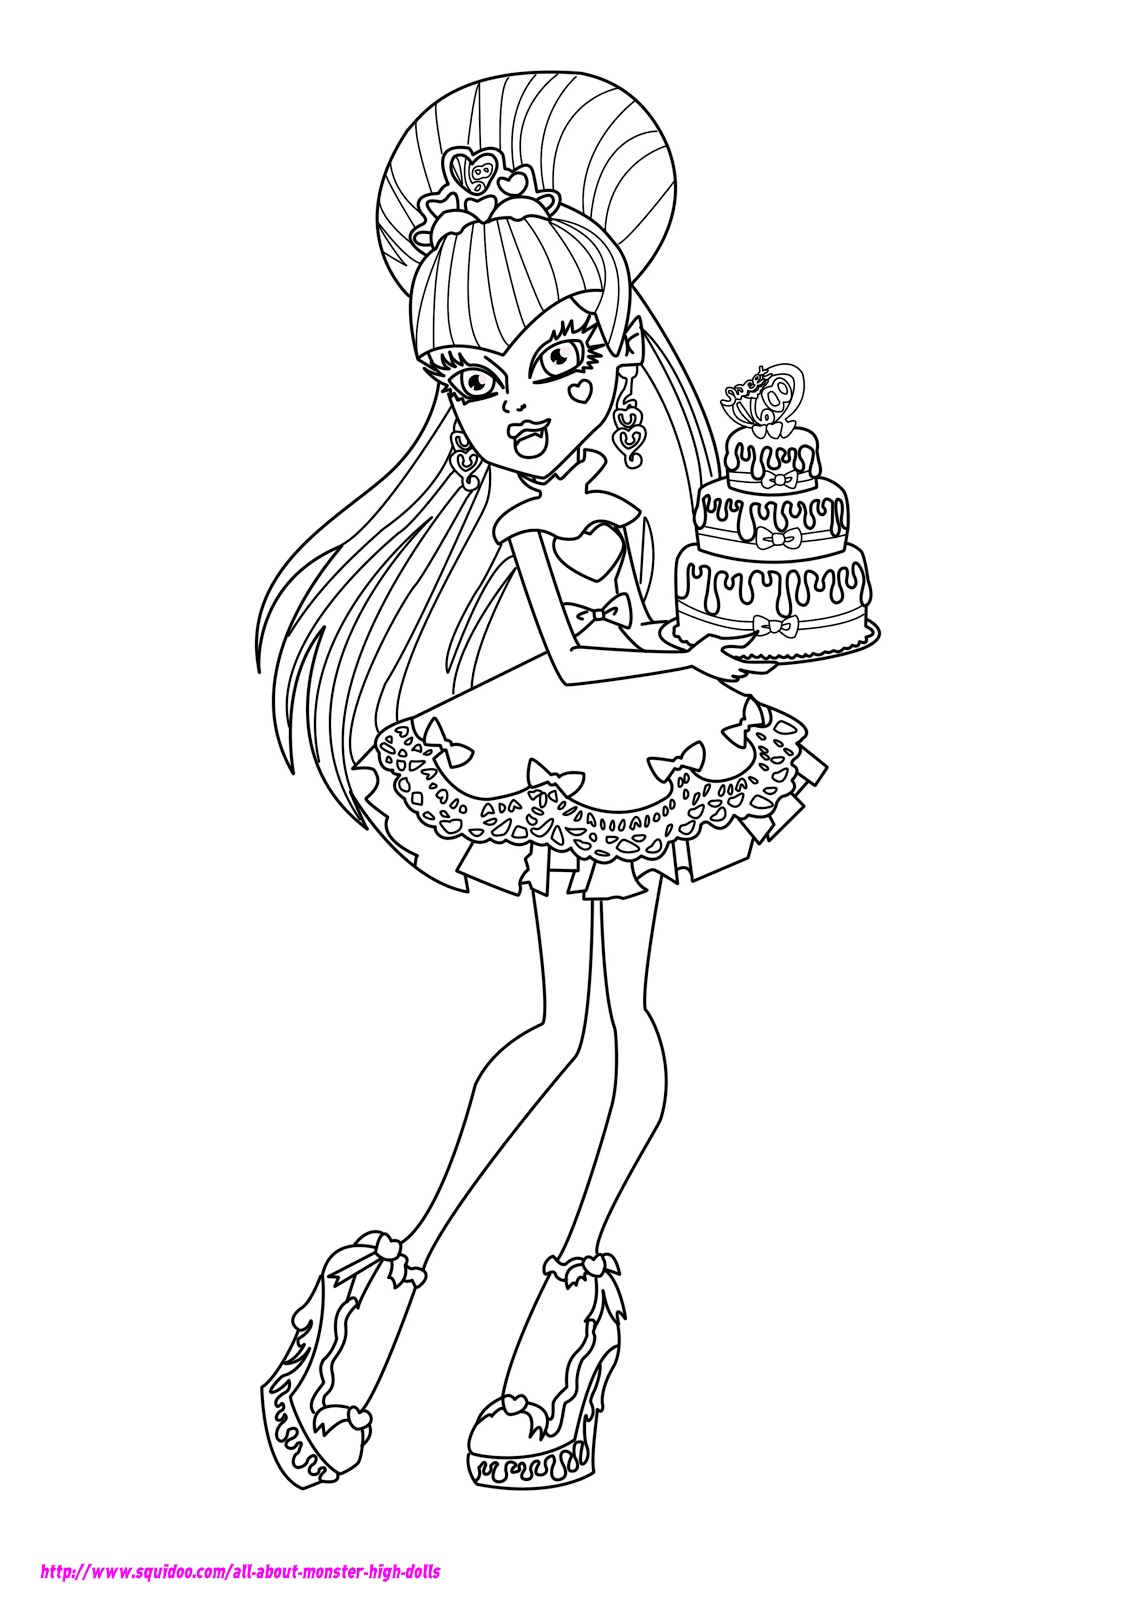 monster-high-24838-animation-movies-free-printable-coloring-pages